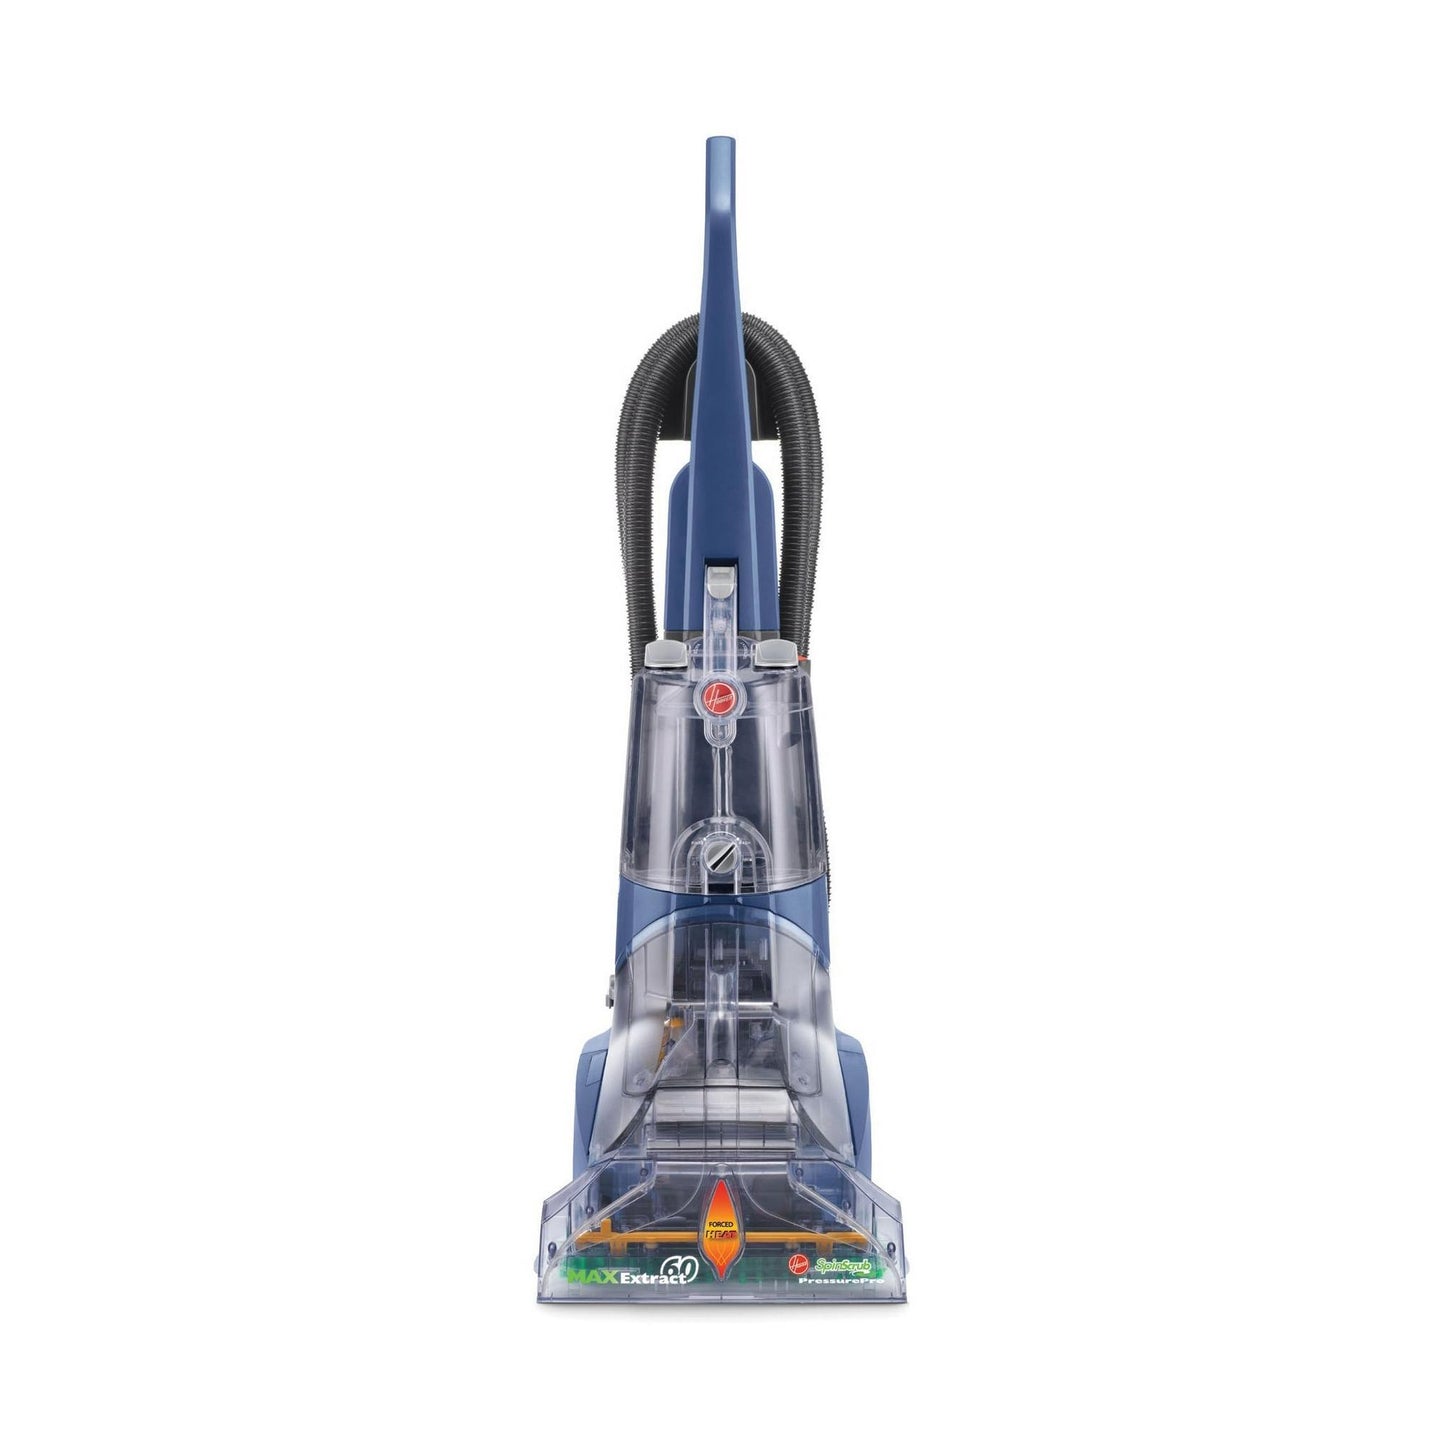 Reconditioned Max Extract 60 Pressure Pro Deep Carpet Cleaner